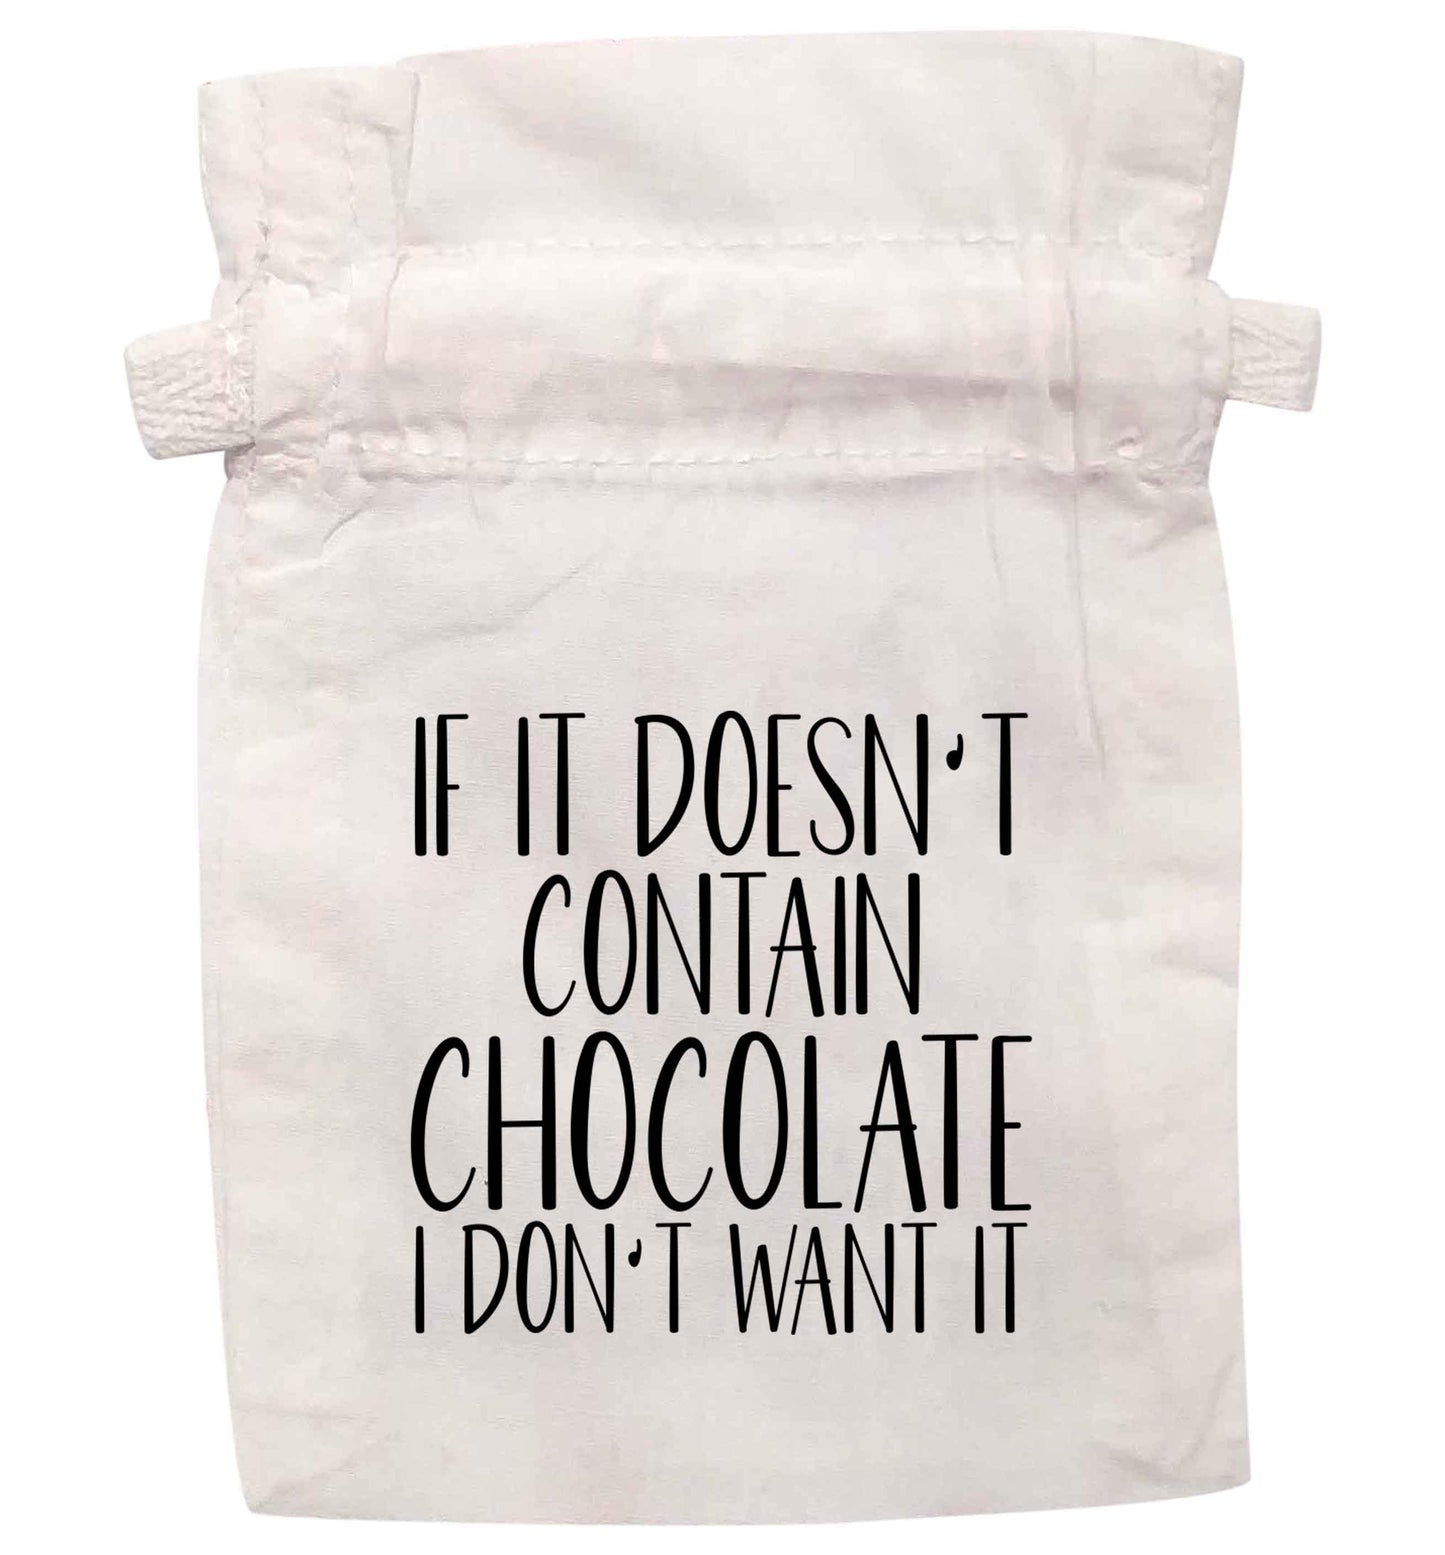 If it doesn't contain chocolate I don't want it | XS - L | Pouch / Drawstring bag / Sack | Organic Cotton | Bulk discounts available!